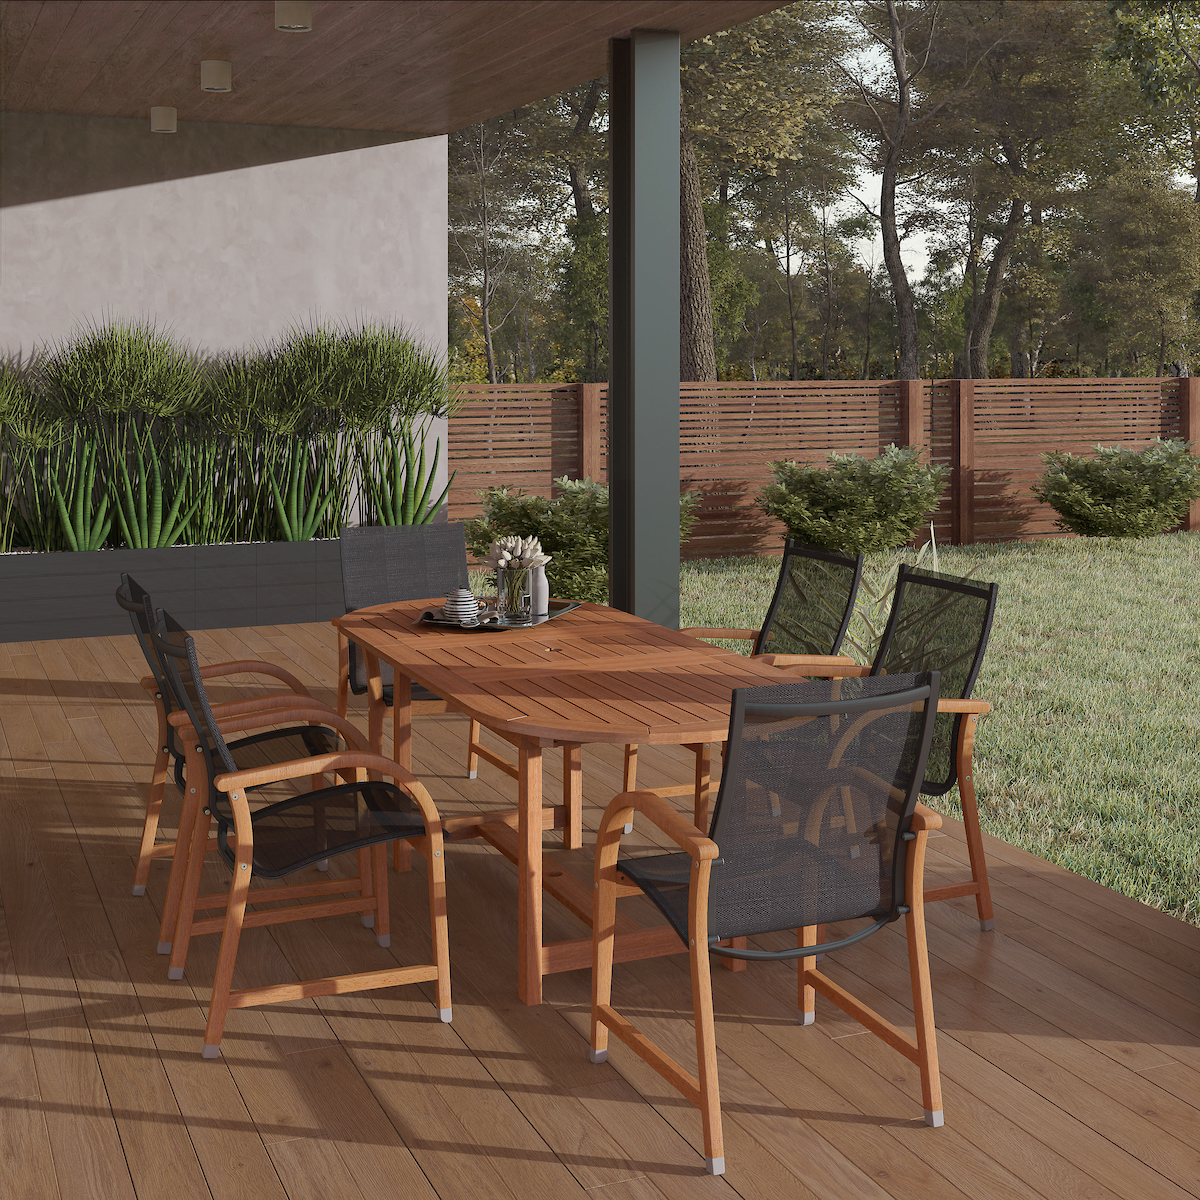 Amazonia Bahamas 7-Piece Extendable Oval Patio Dining Set, Solid Wood 100% FSC Certified - image 1 of 11